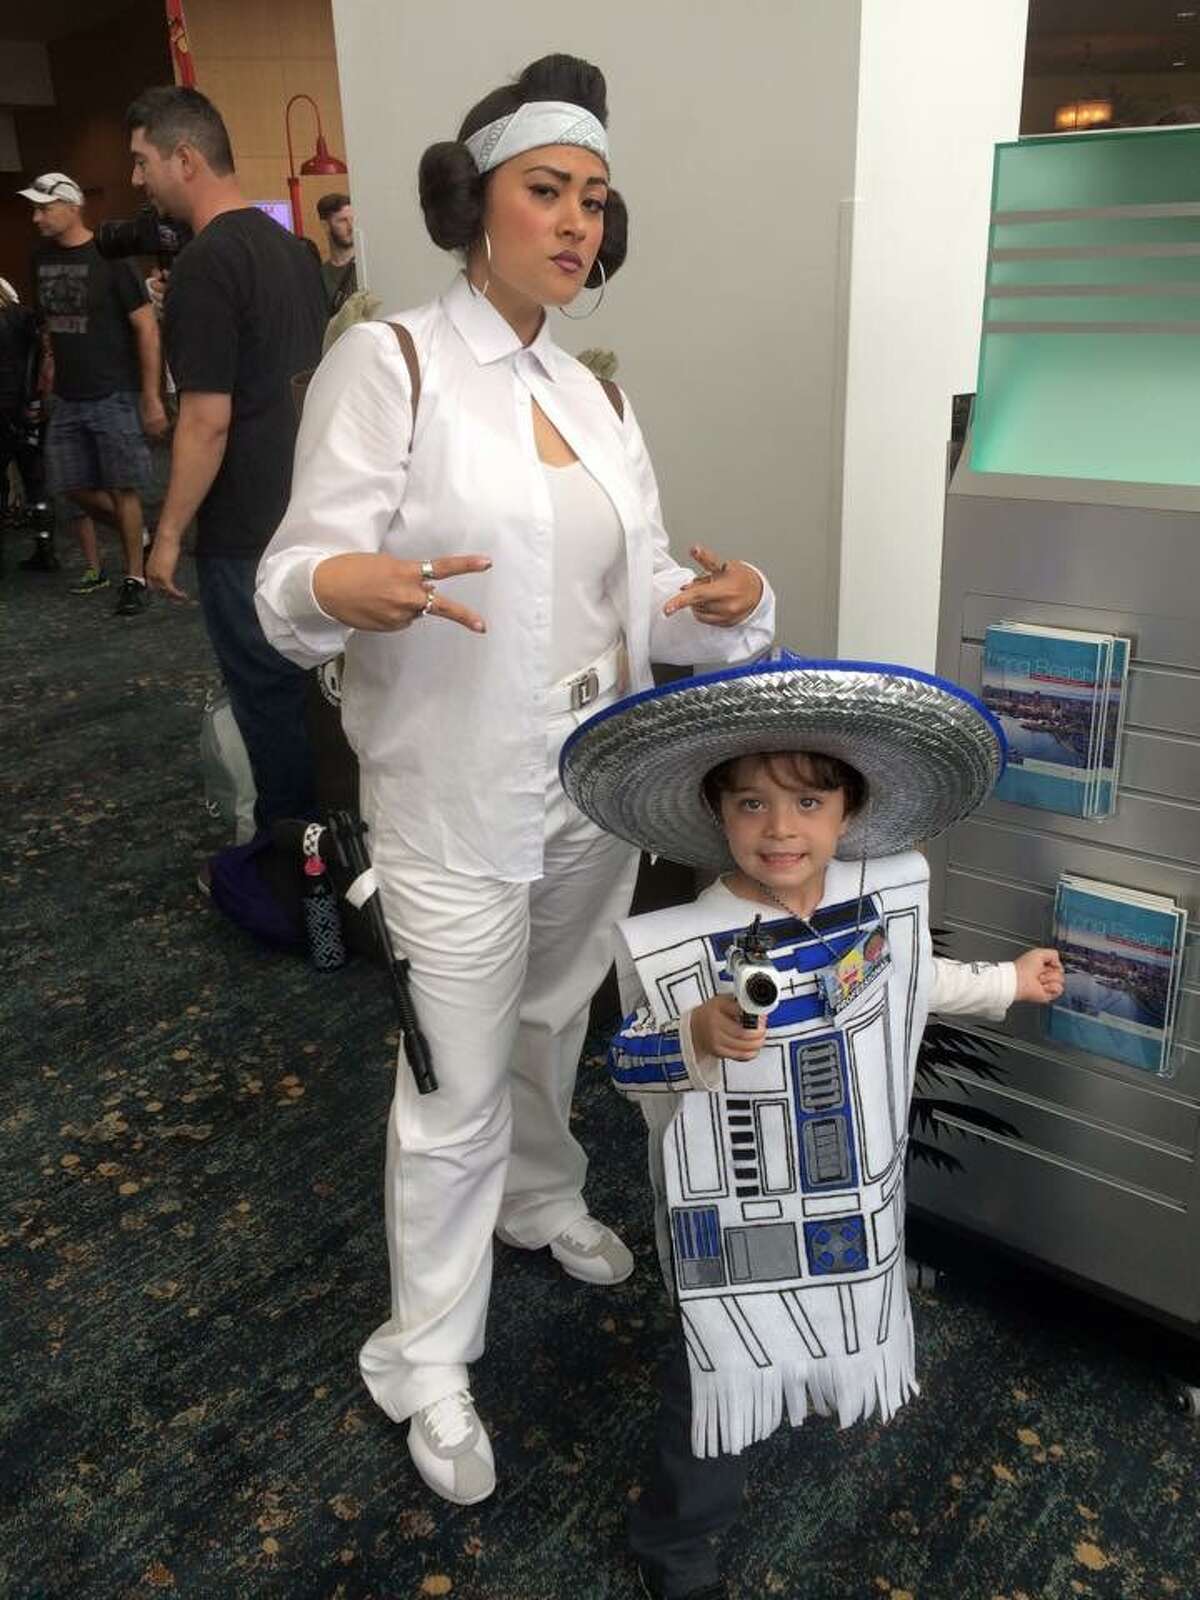 Photographer snaps photo of 'Han Cholo,' 'Loca Leia' in 'Star Wars' cosplay  at Long Beach Comic Con